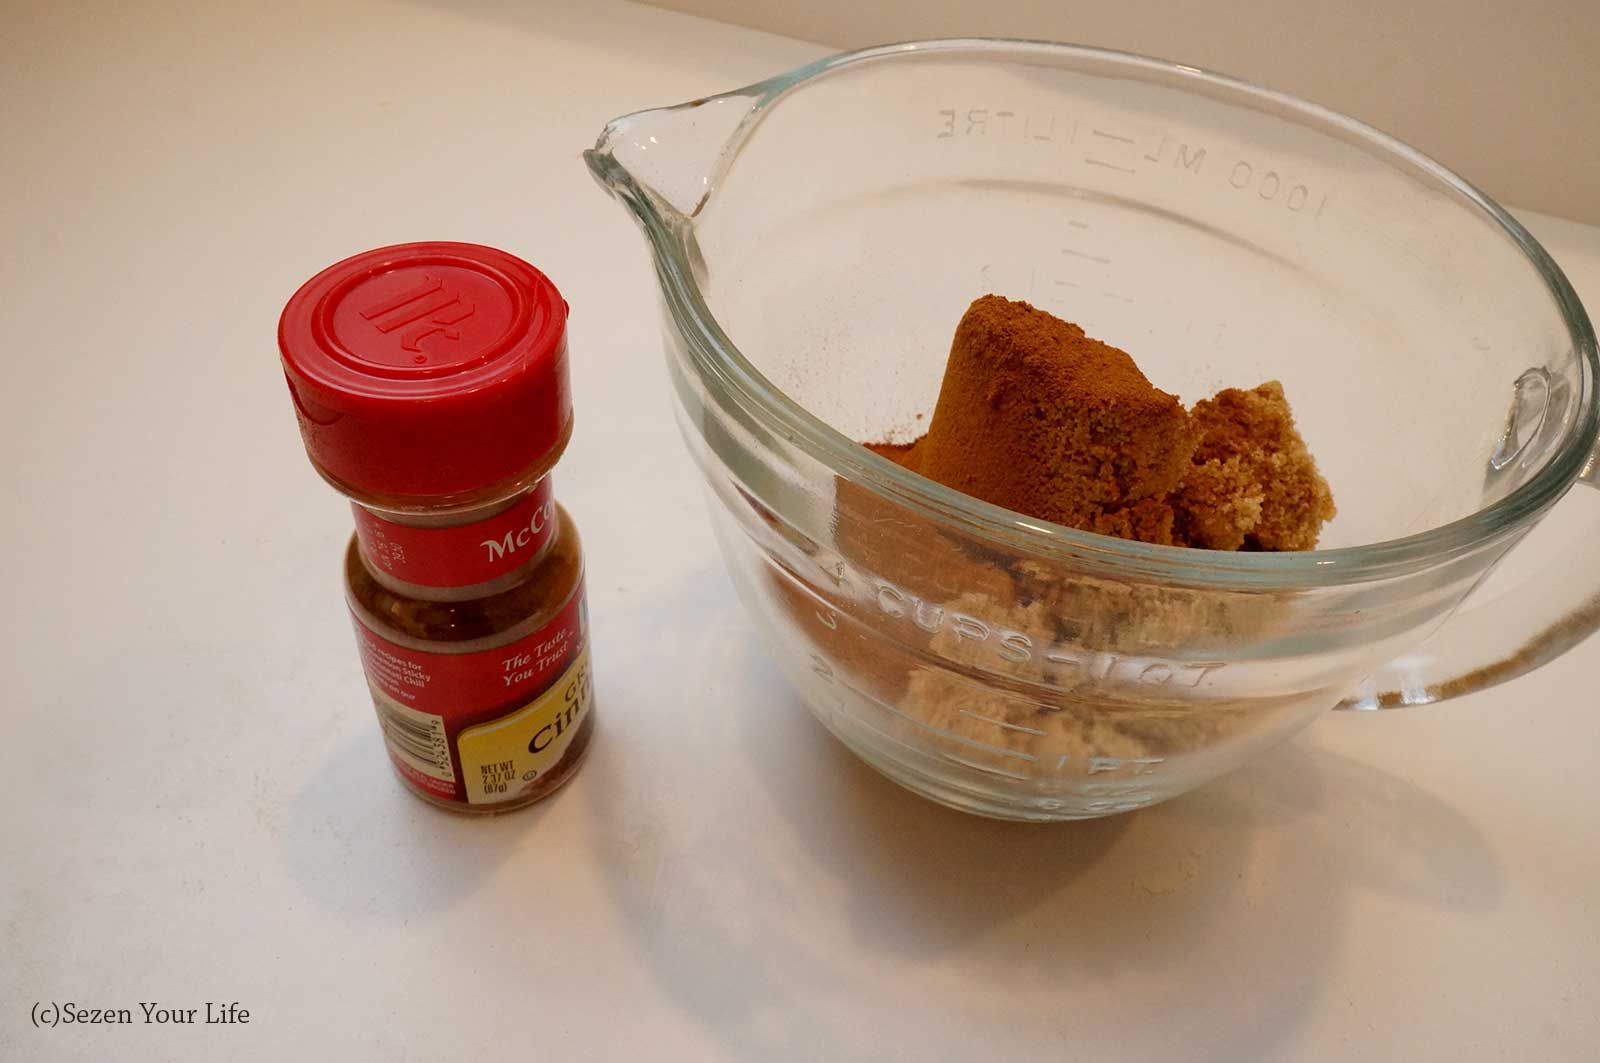 Brown Sugar and Cinnamon for Rolls by Sarah Franzen